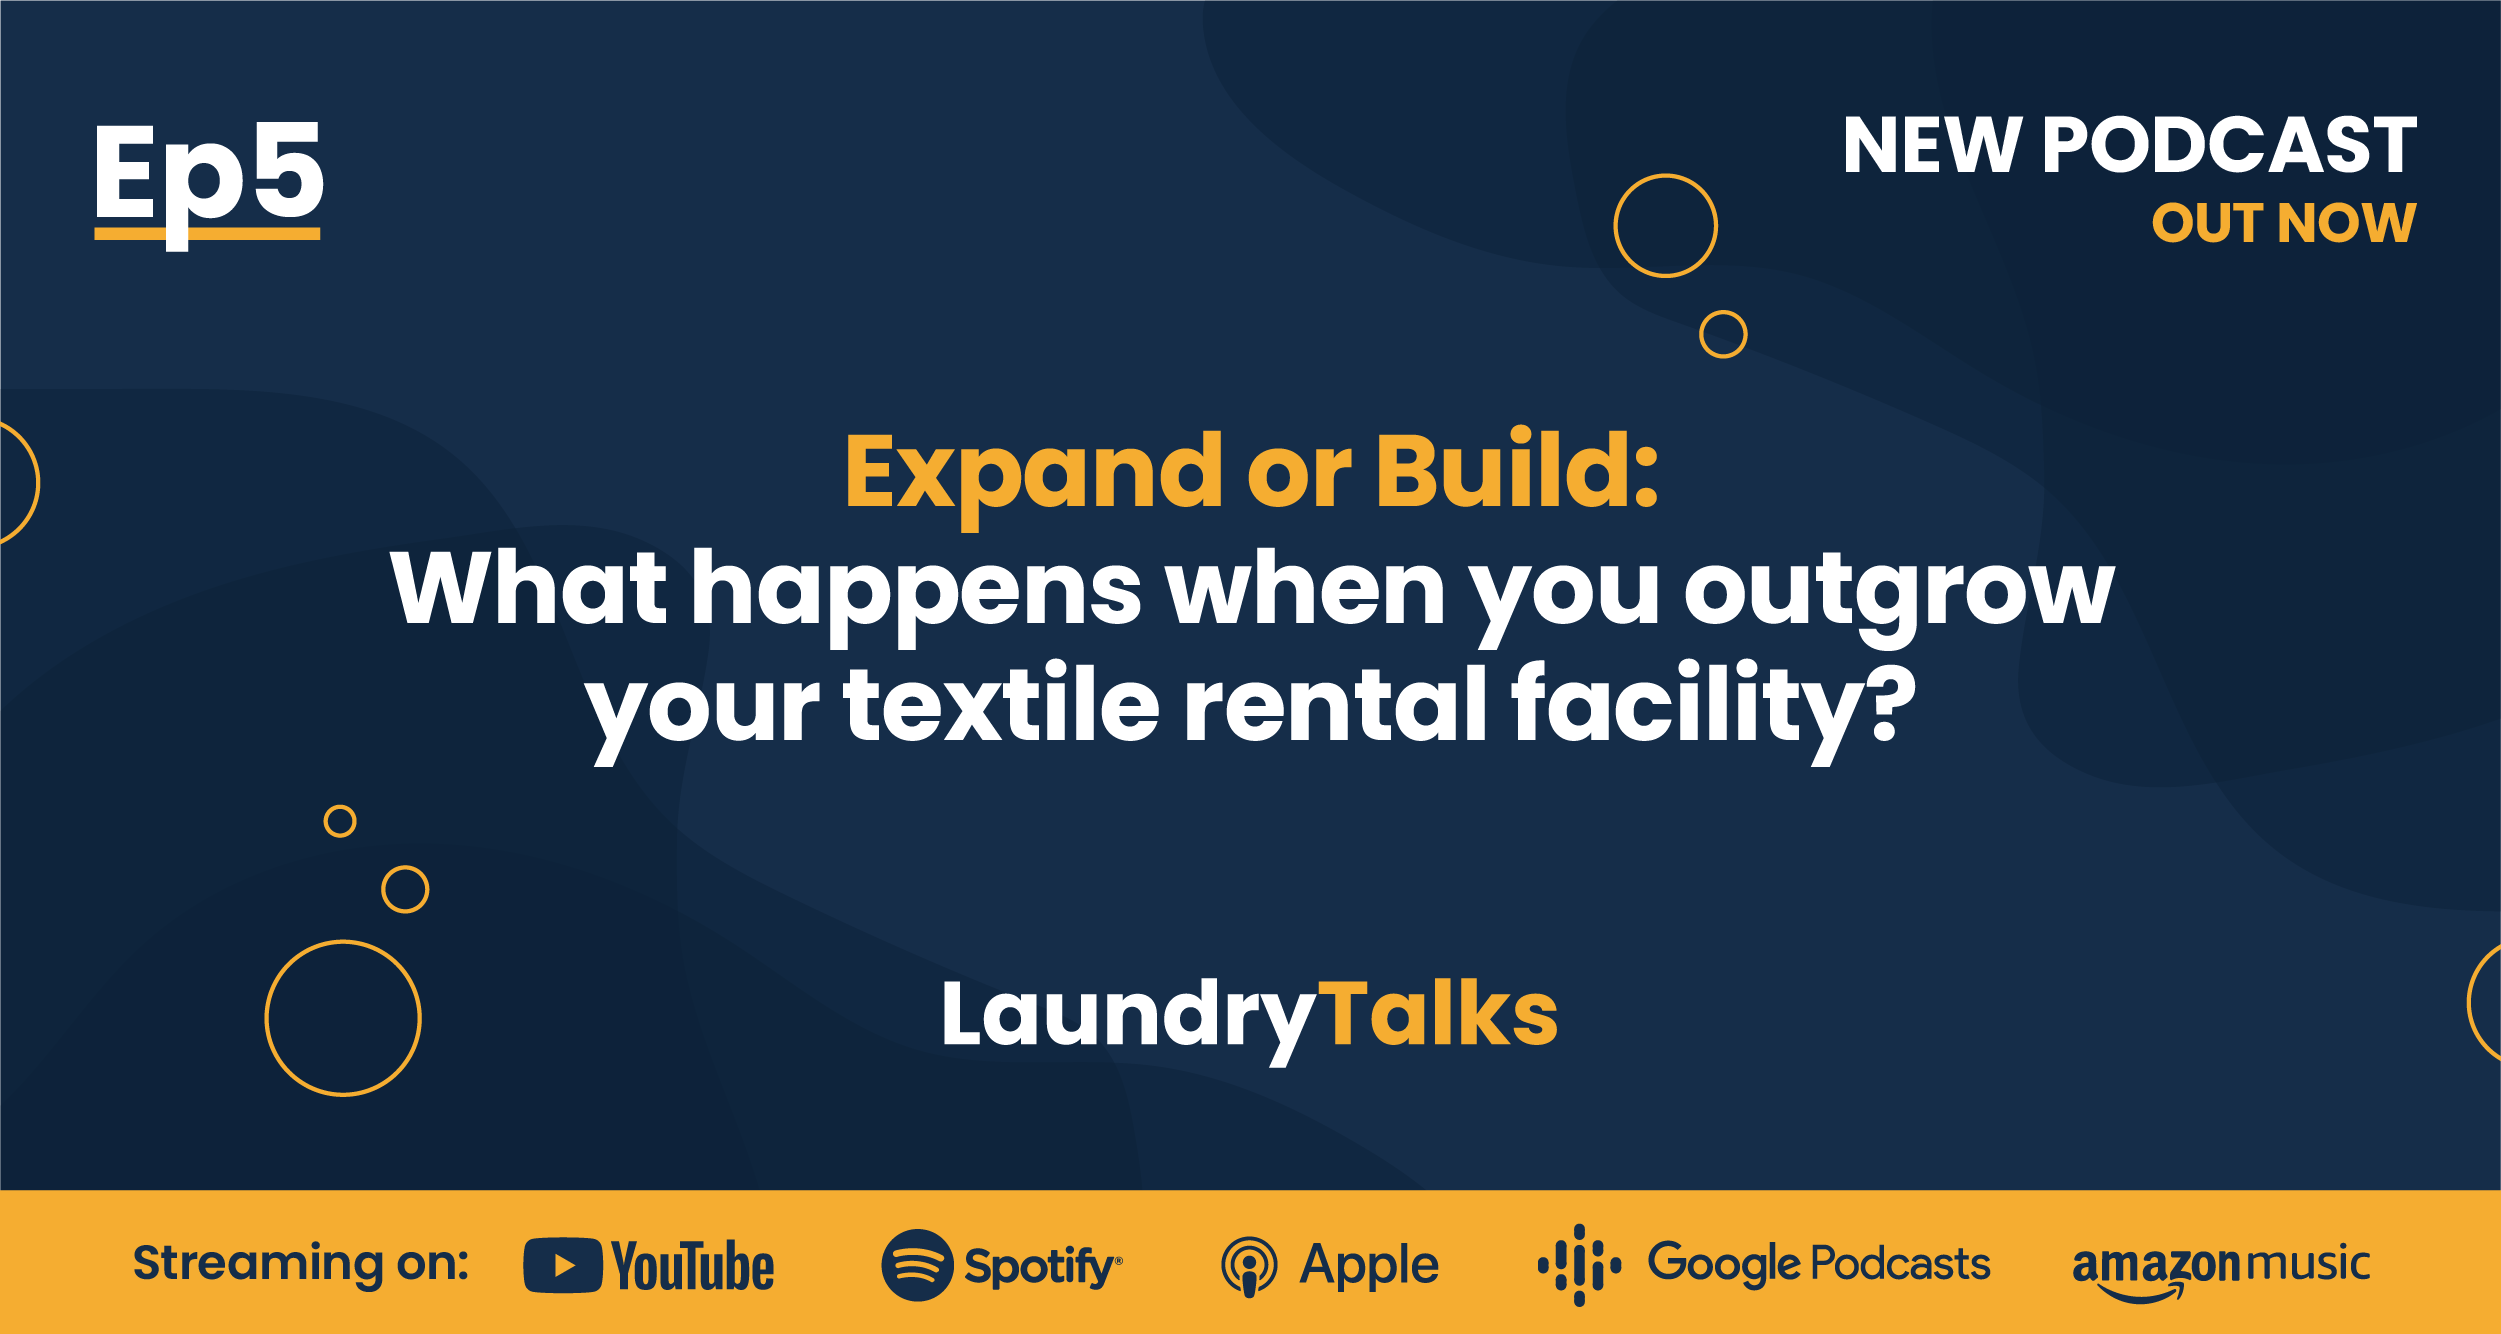 EP5: Expand or Build: What happens when you outgrow your textile rental facility?